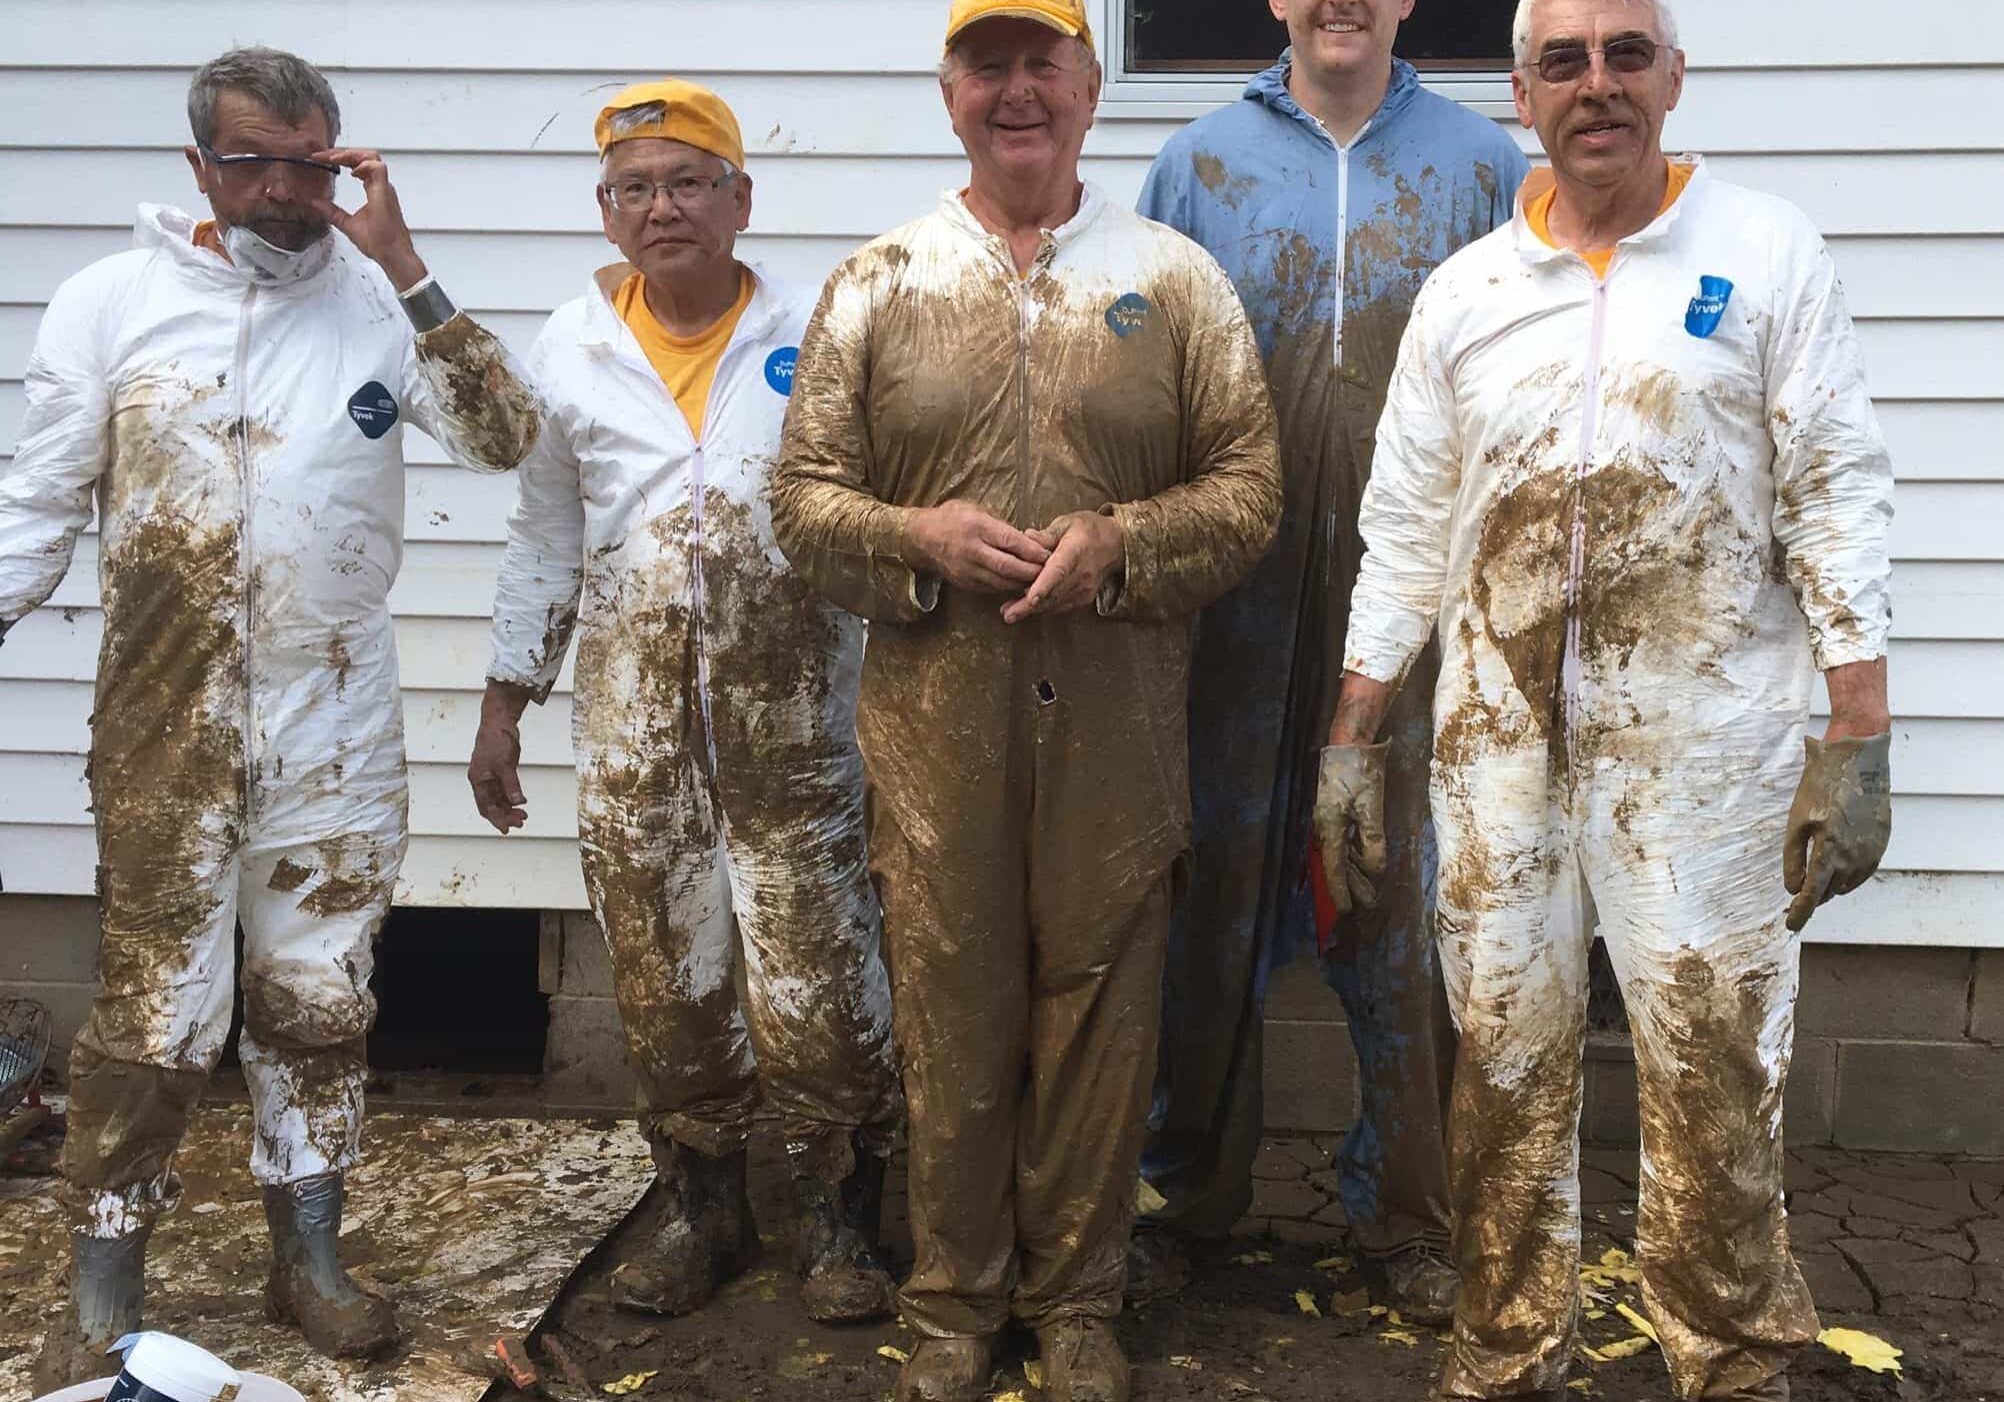 George (right) and his team accomplished some dirty work in West Virginia after the 2016 floods.